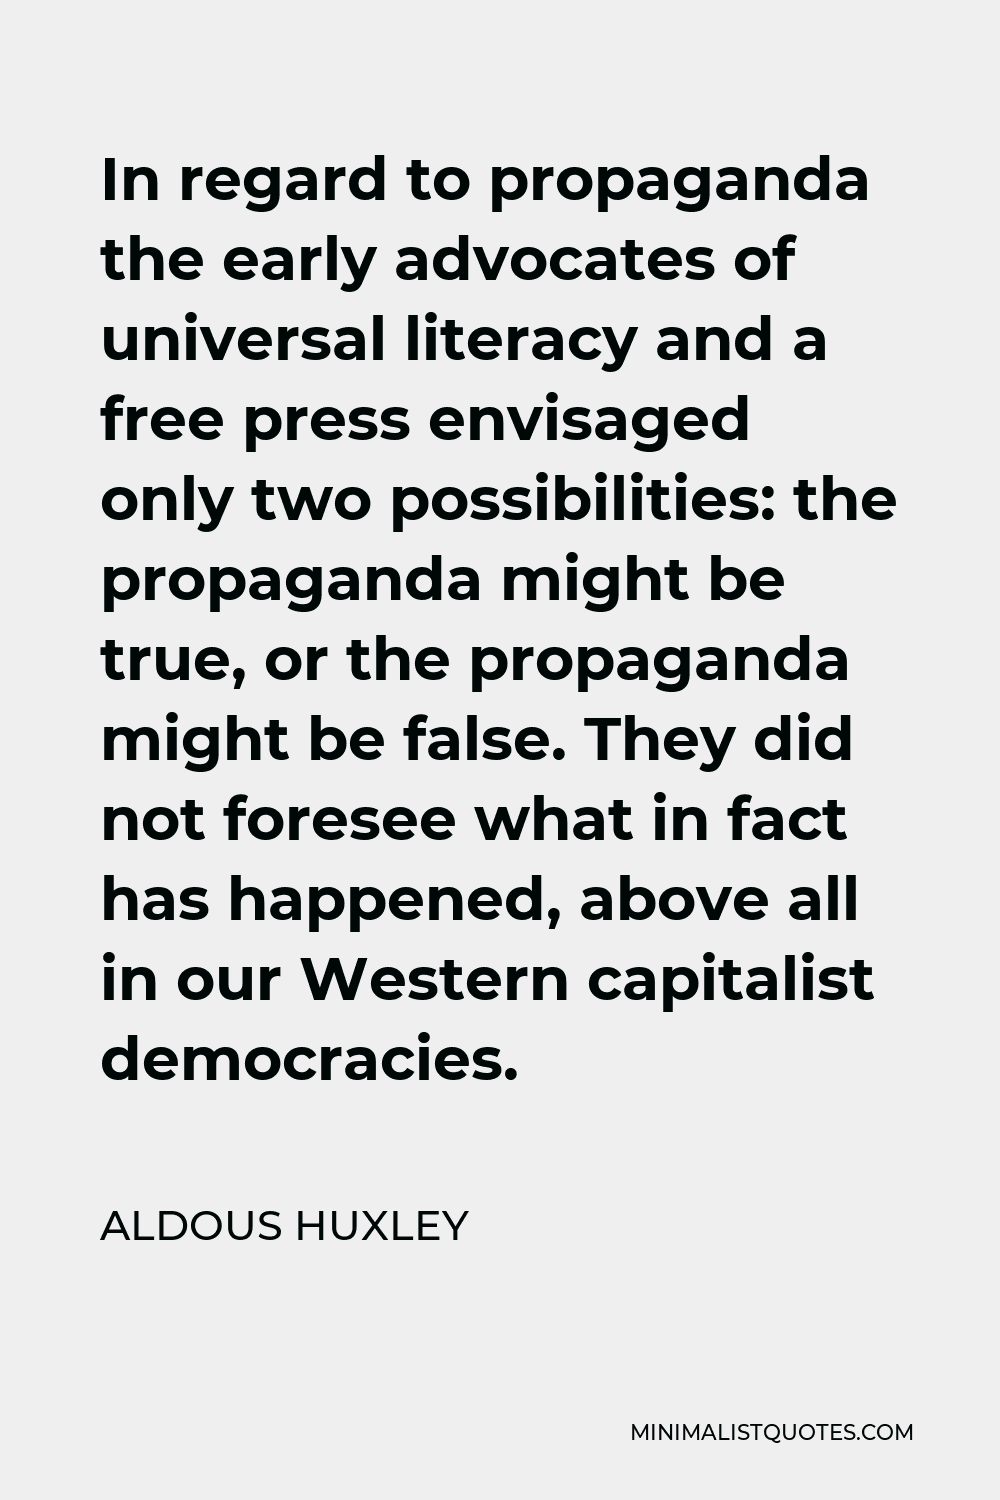 Aldous Huxley Quote - In regard to propaganda the early advocates of universal literacy and a free press envisaged only two possibilities: the propaganda might be true, or the propaganda might be false. They did not foresee what in fact has happened, above all in our Western capitalist democracies.